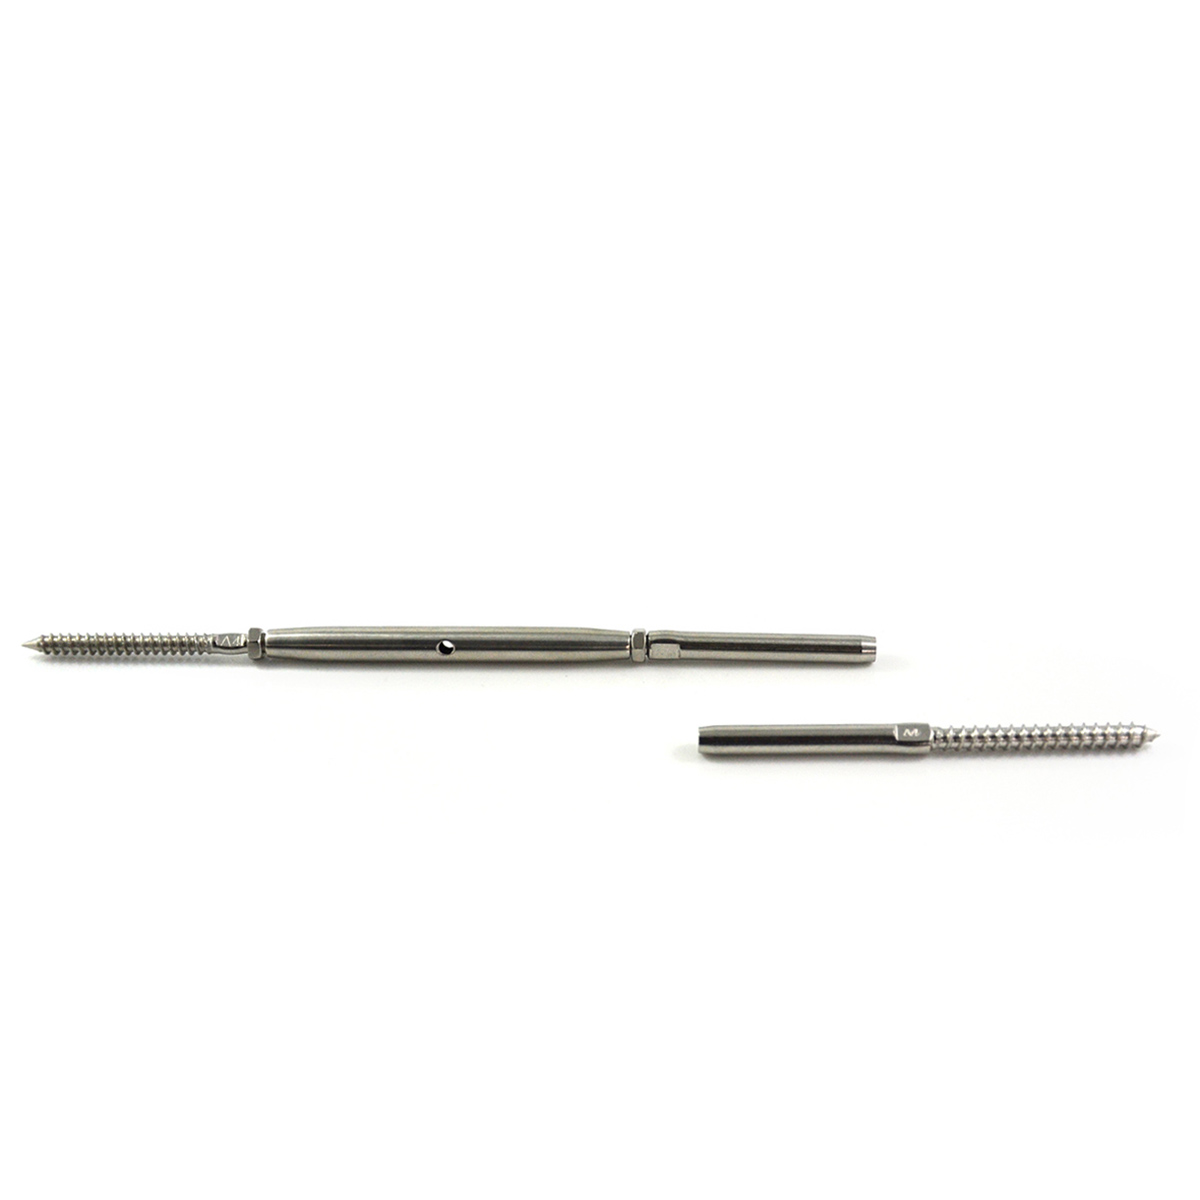 Stainless Wire Balustrade Kit - Lag & Swage Bottlescrew and Lag Screw Swage Terminal